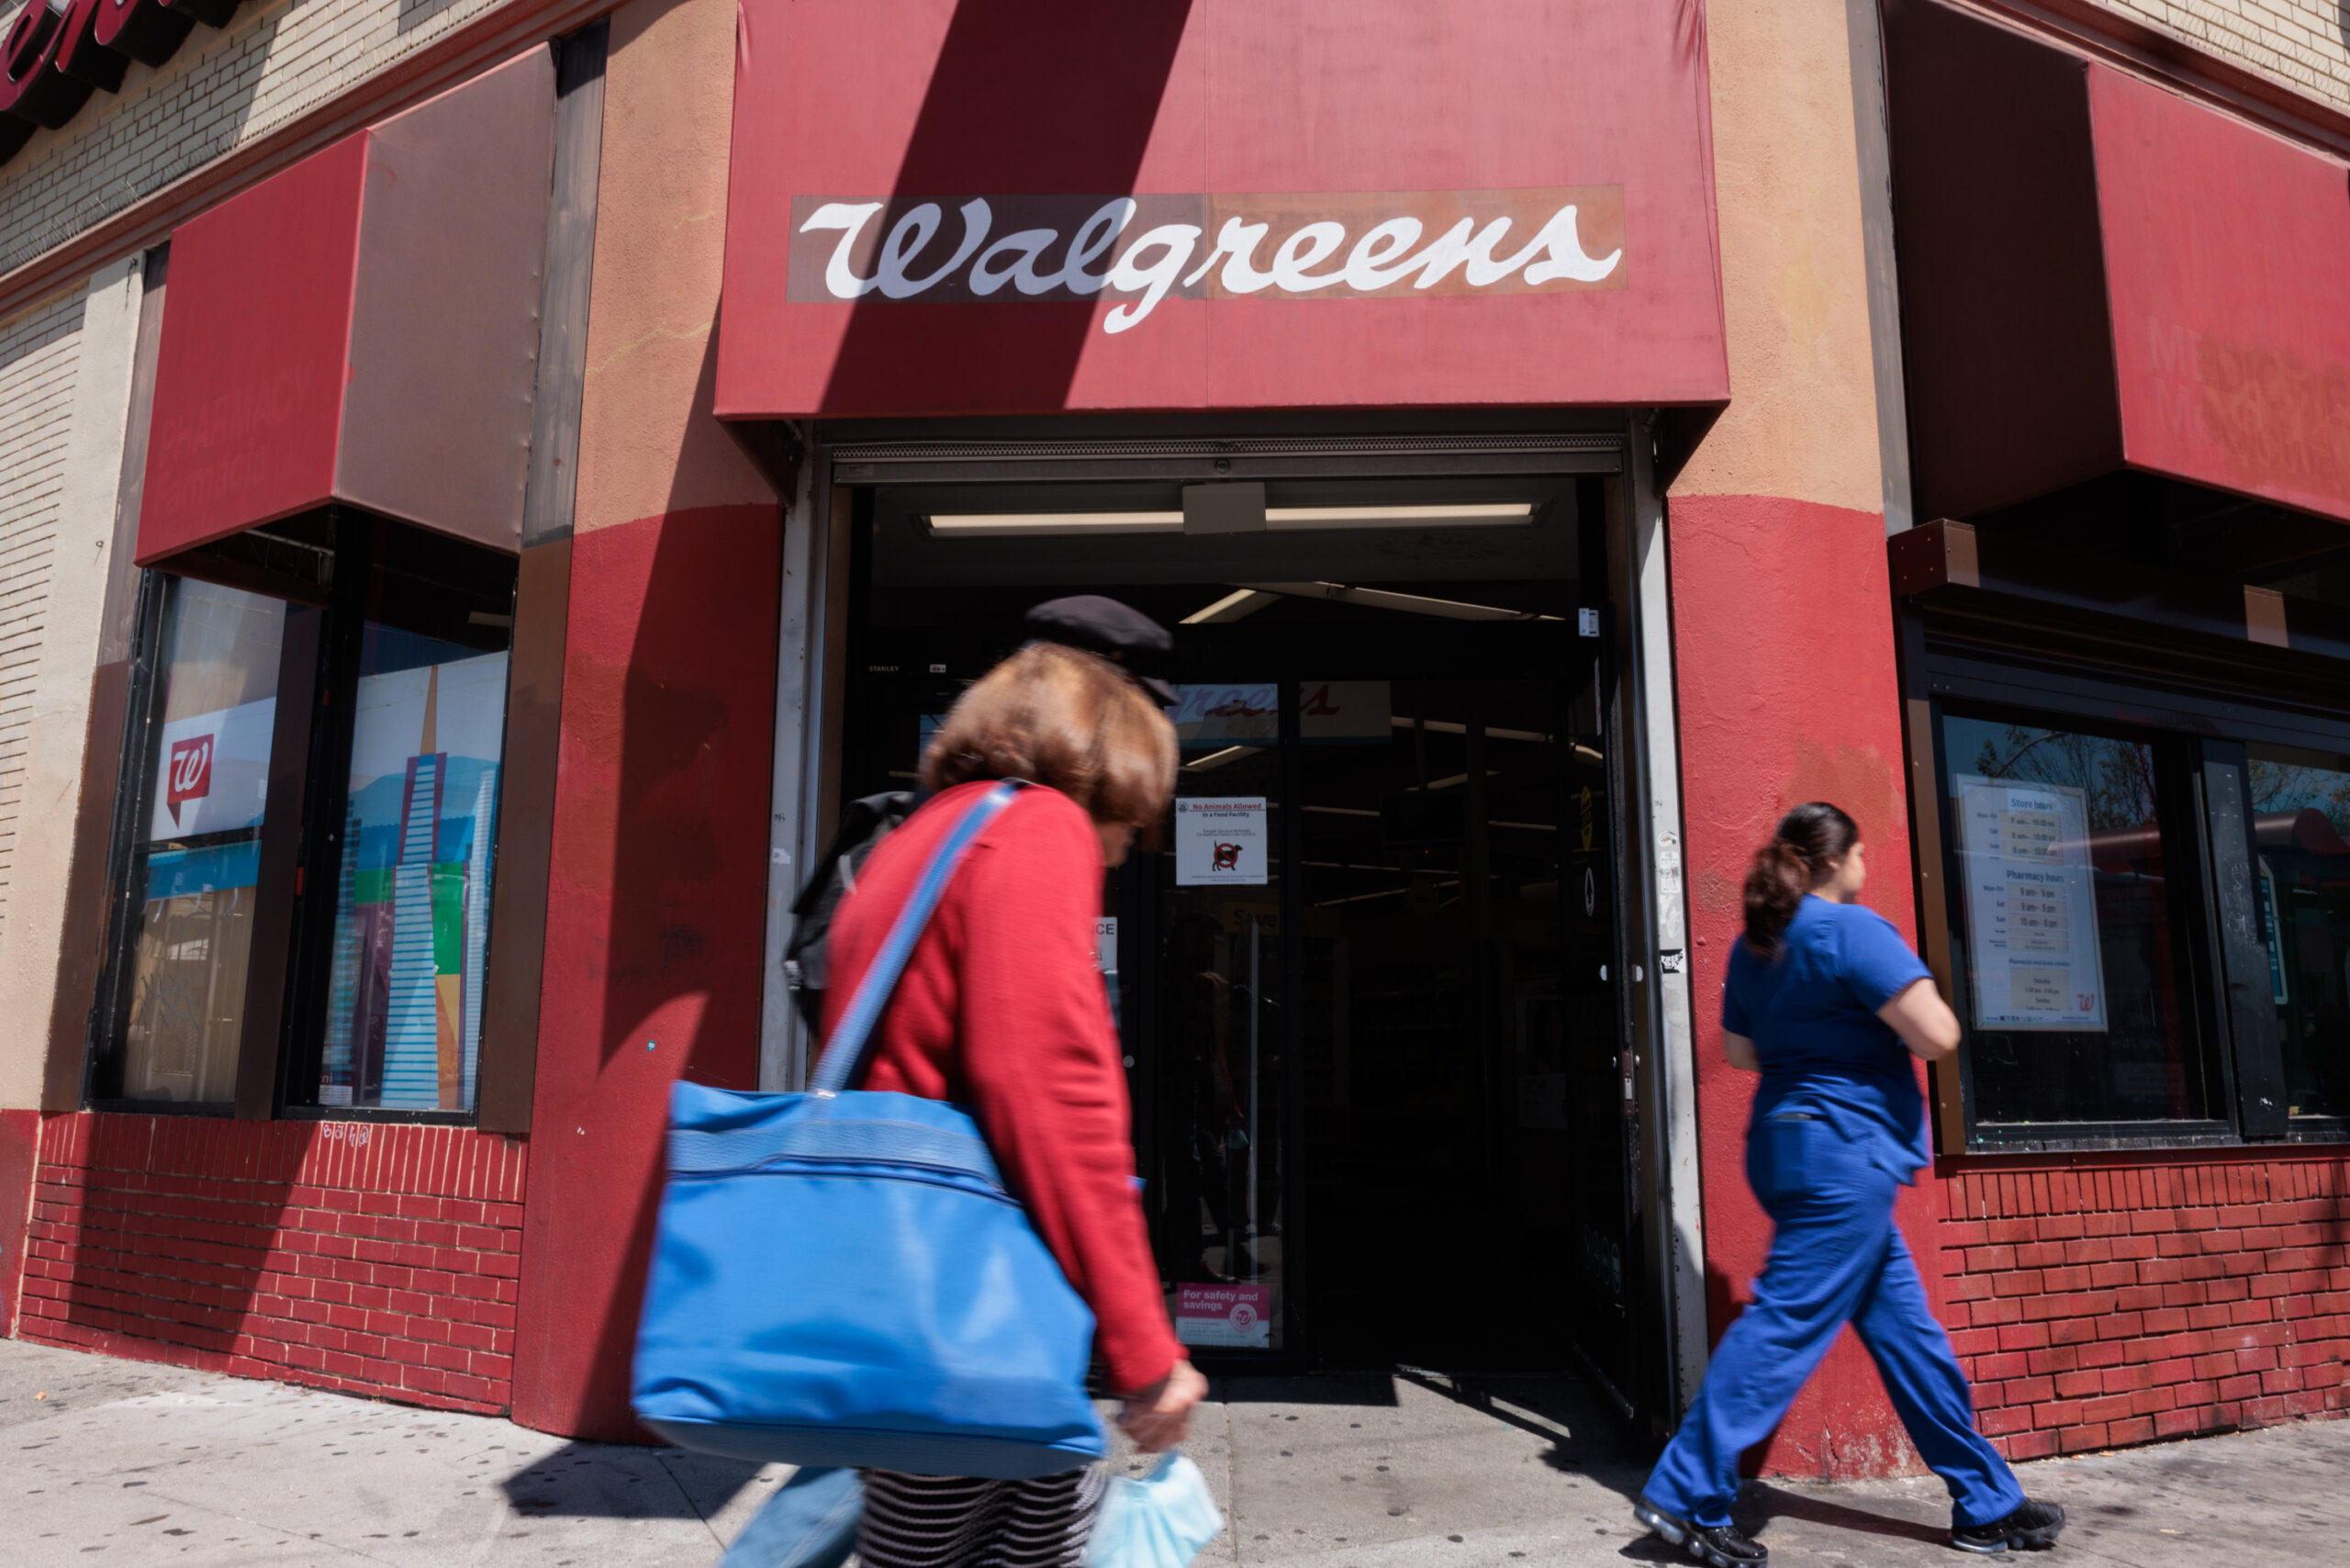 Hanging out at San Francisco’s most shoplifted Walgreens stores